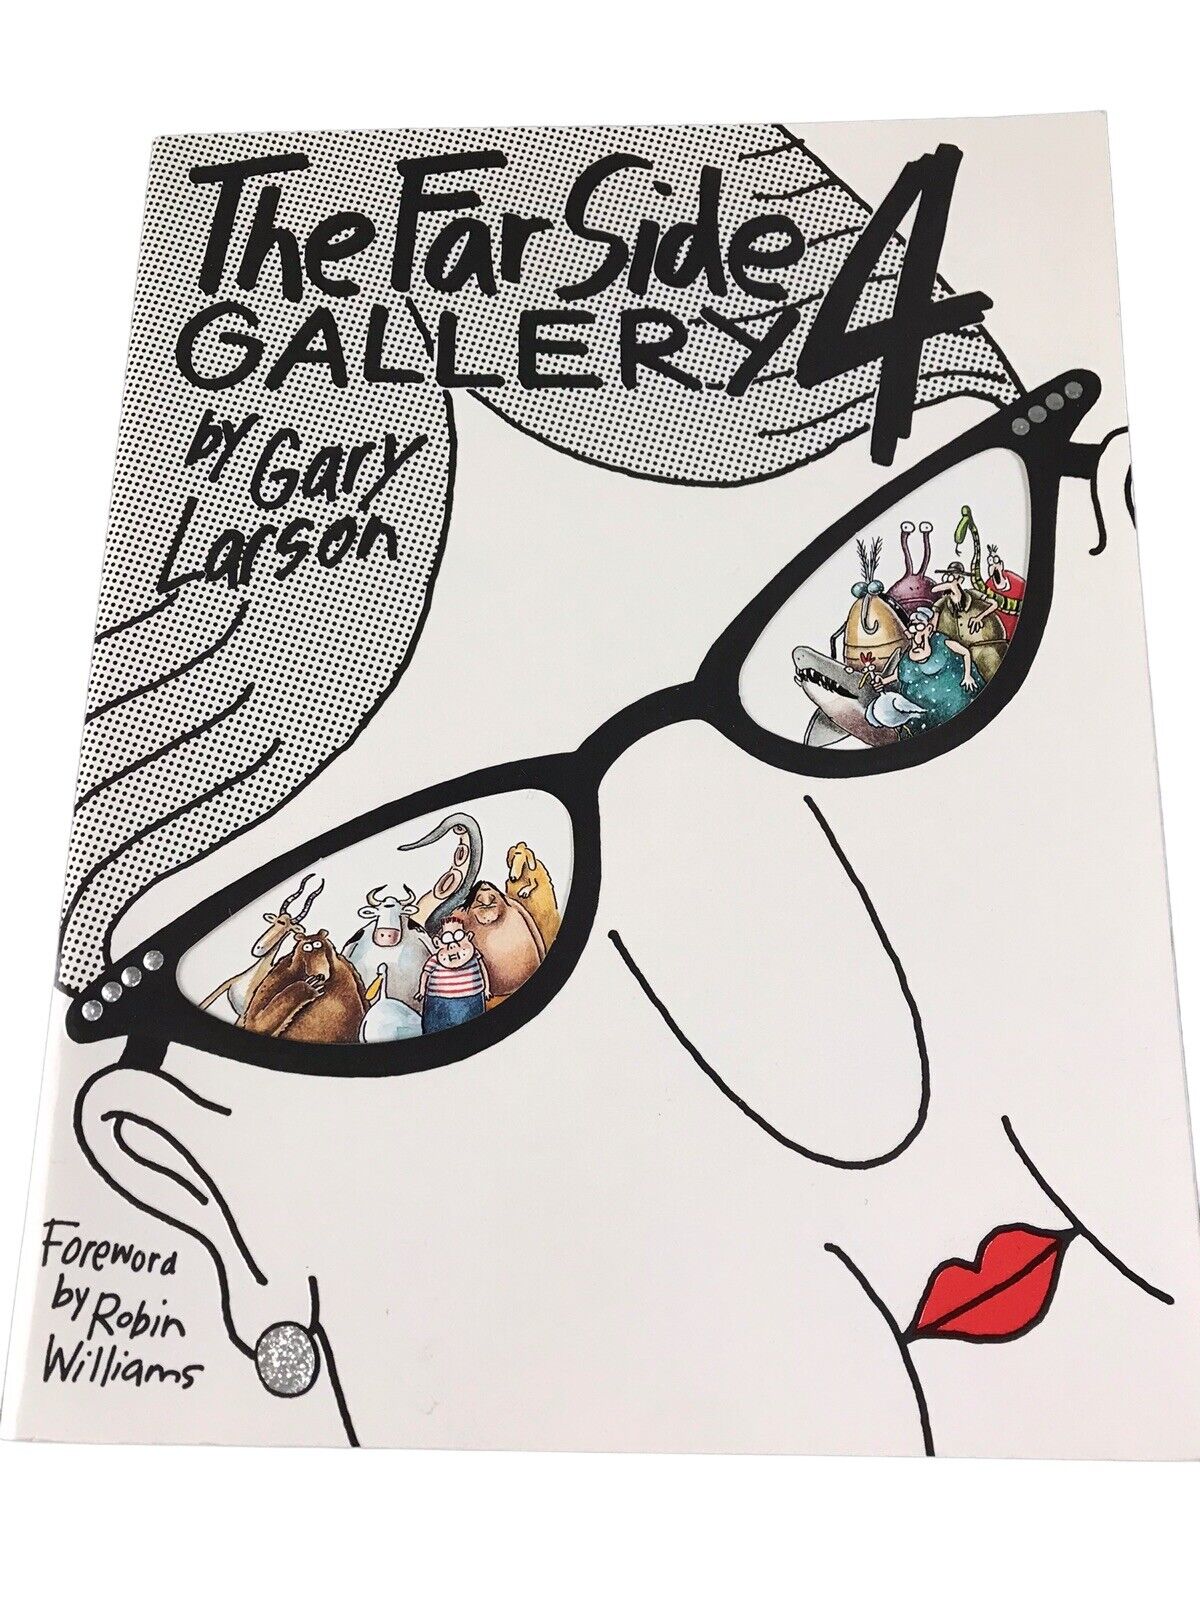 The Far Side Gallery #4 by Gary Larson Paperback 1993  Robin Williams NEW